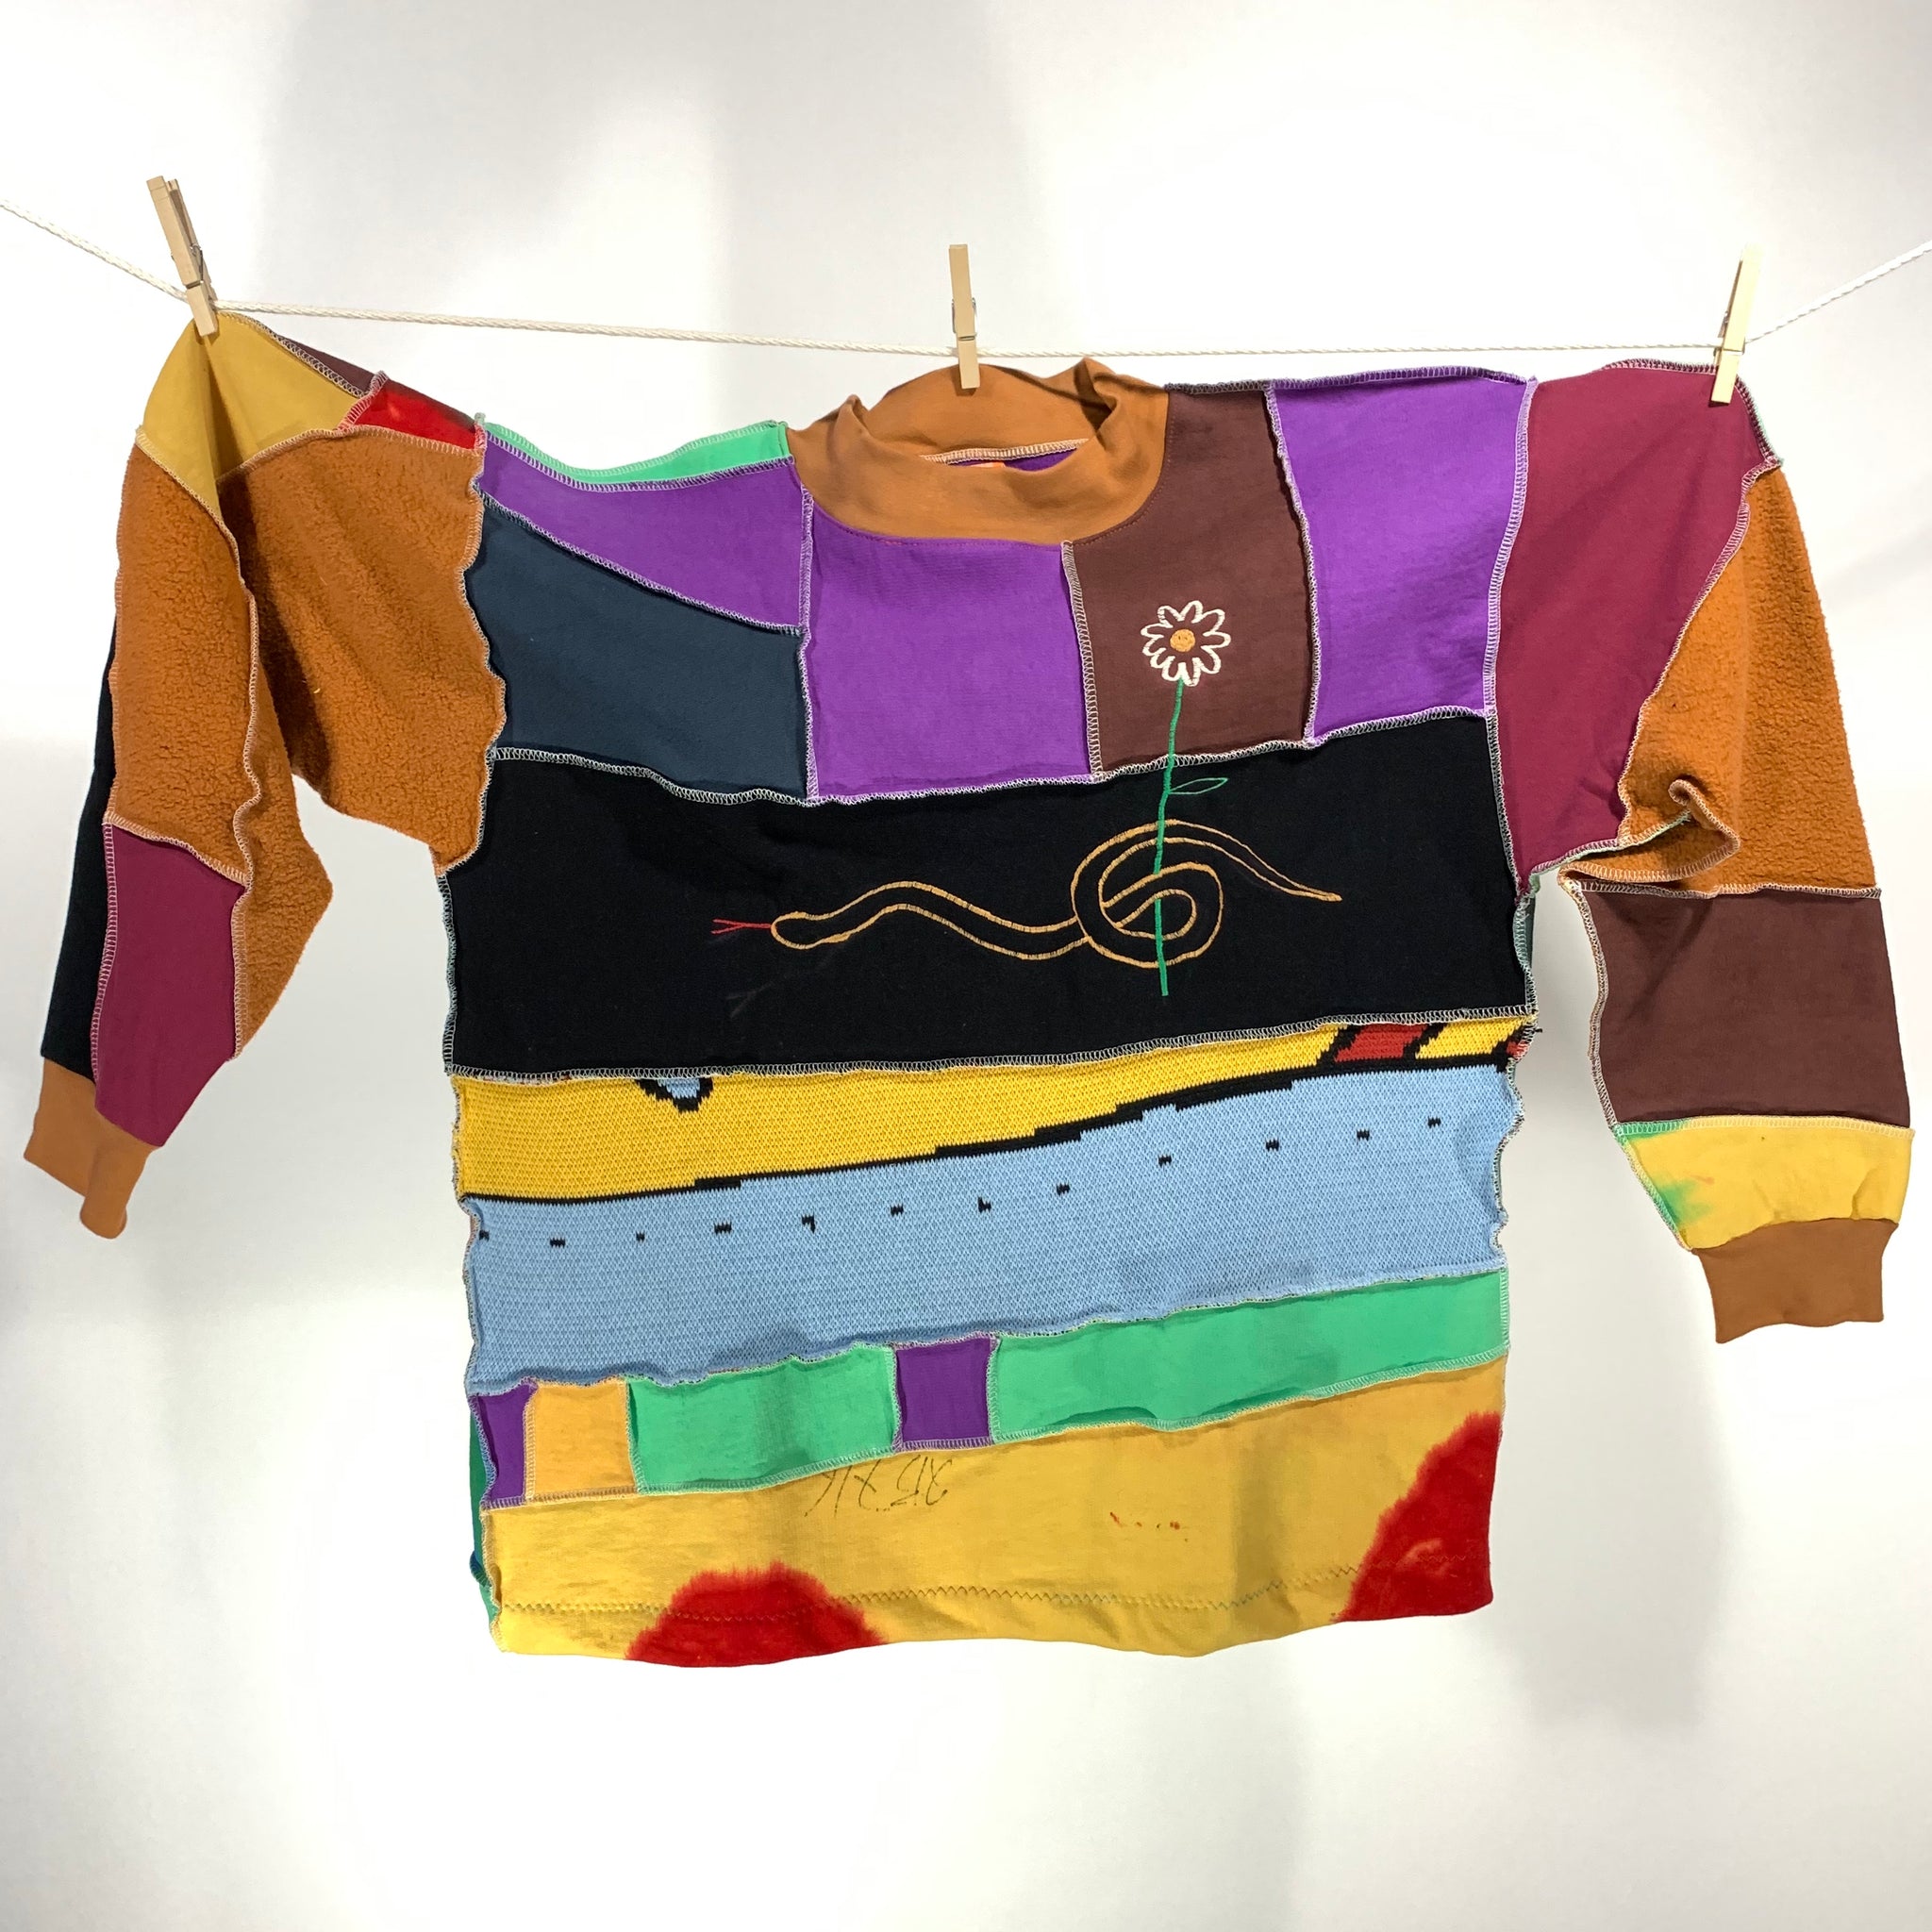 Home sewn sweater with embroidery - L